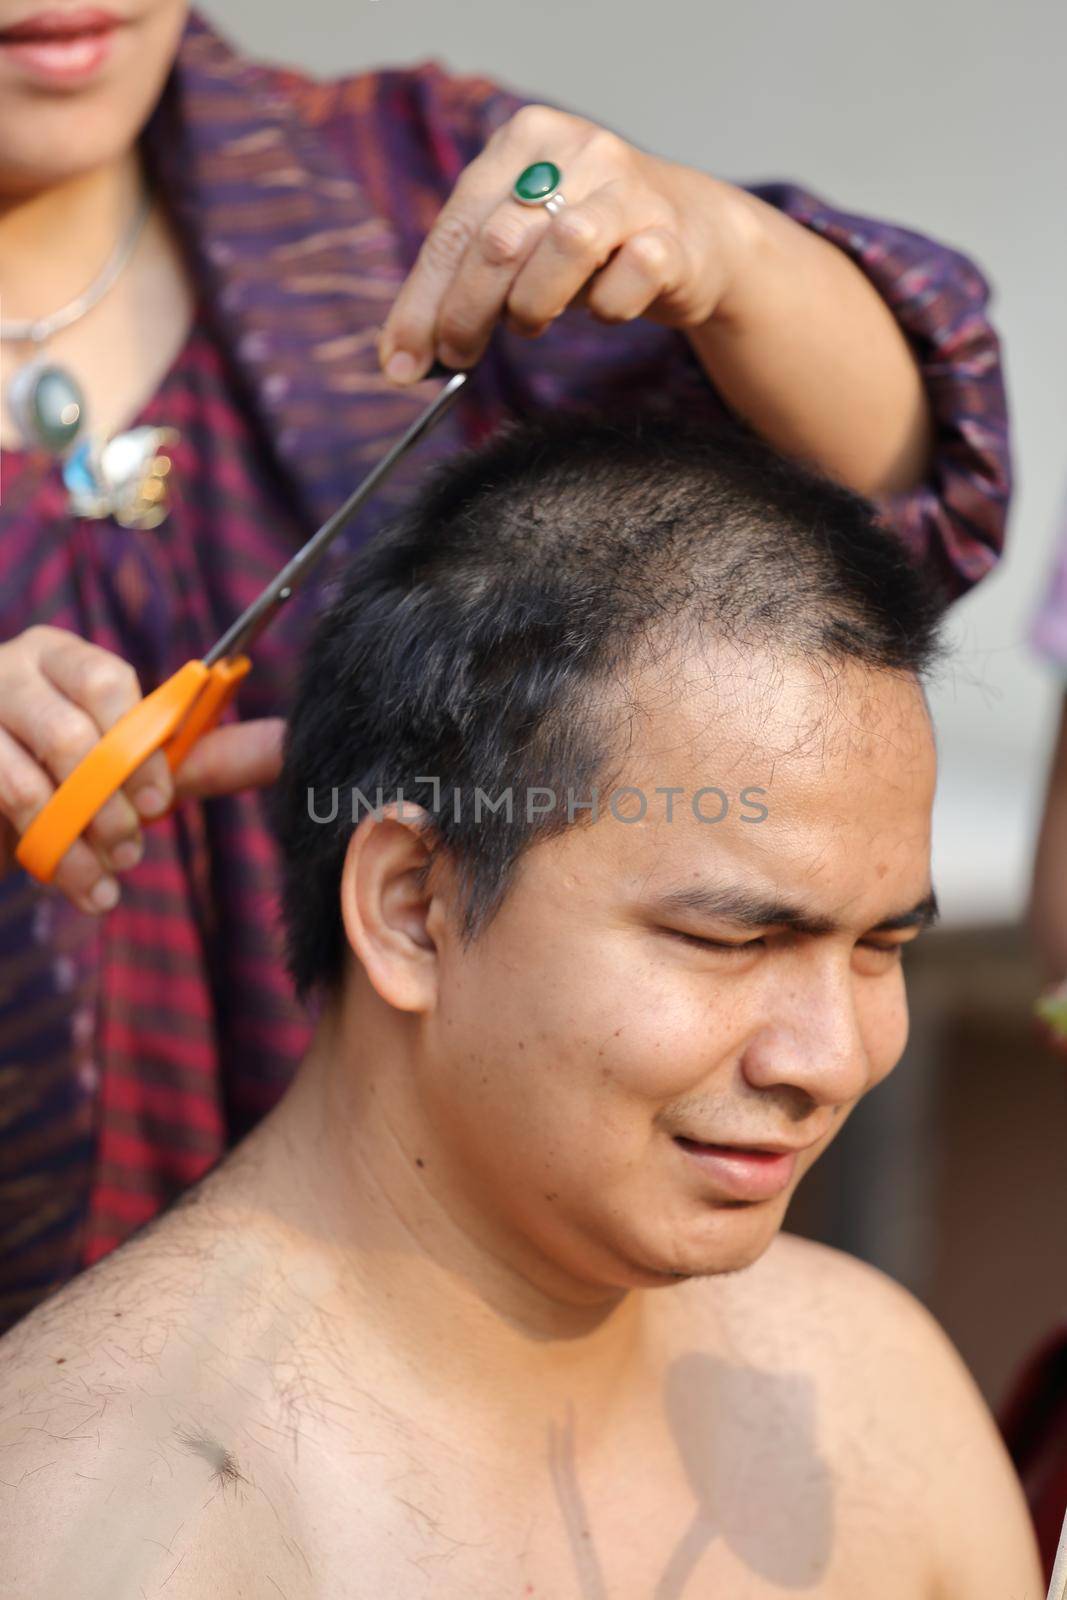 Male who will be monk cut hair for be Ordained by geargodz